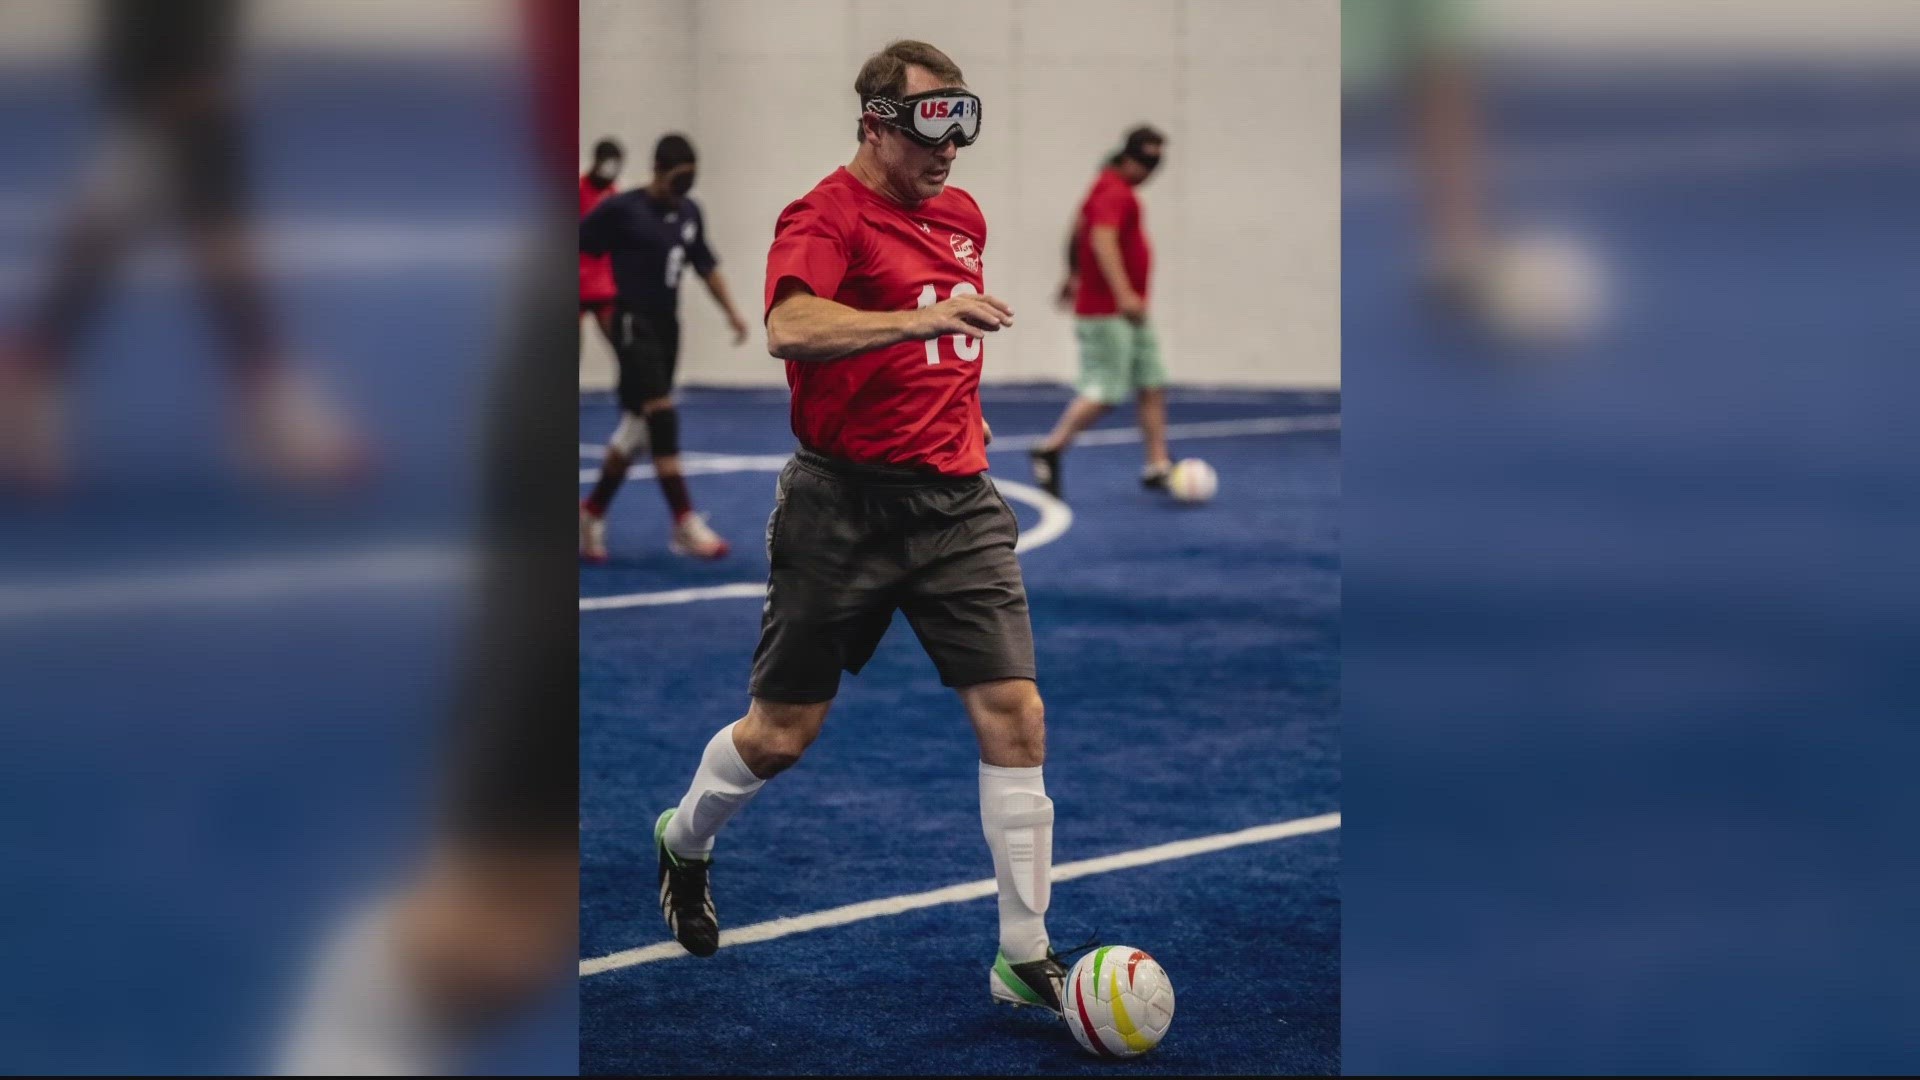 History was made in California over the weekend when the first ever USA Men's Blind Soccer National Team faced off against Canada in an international match.